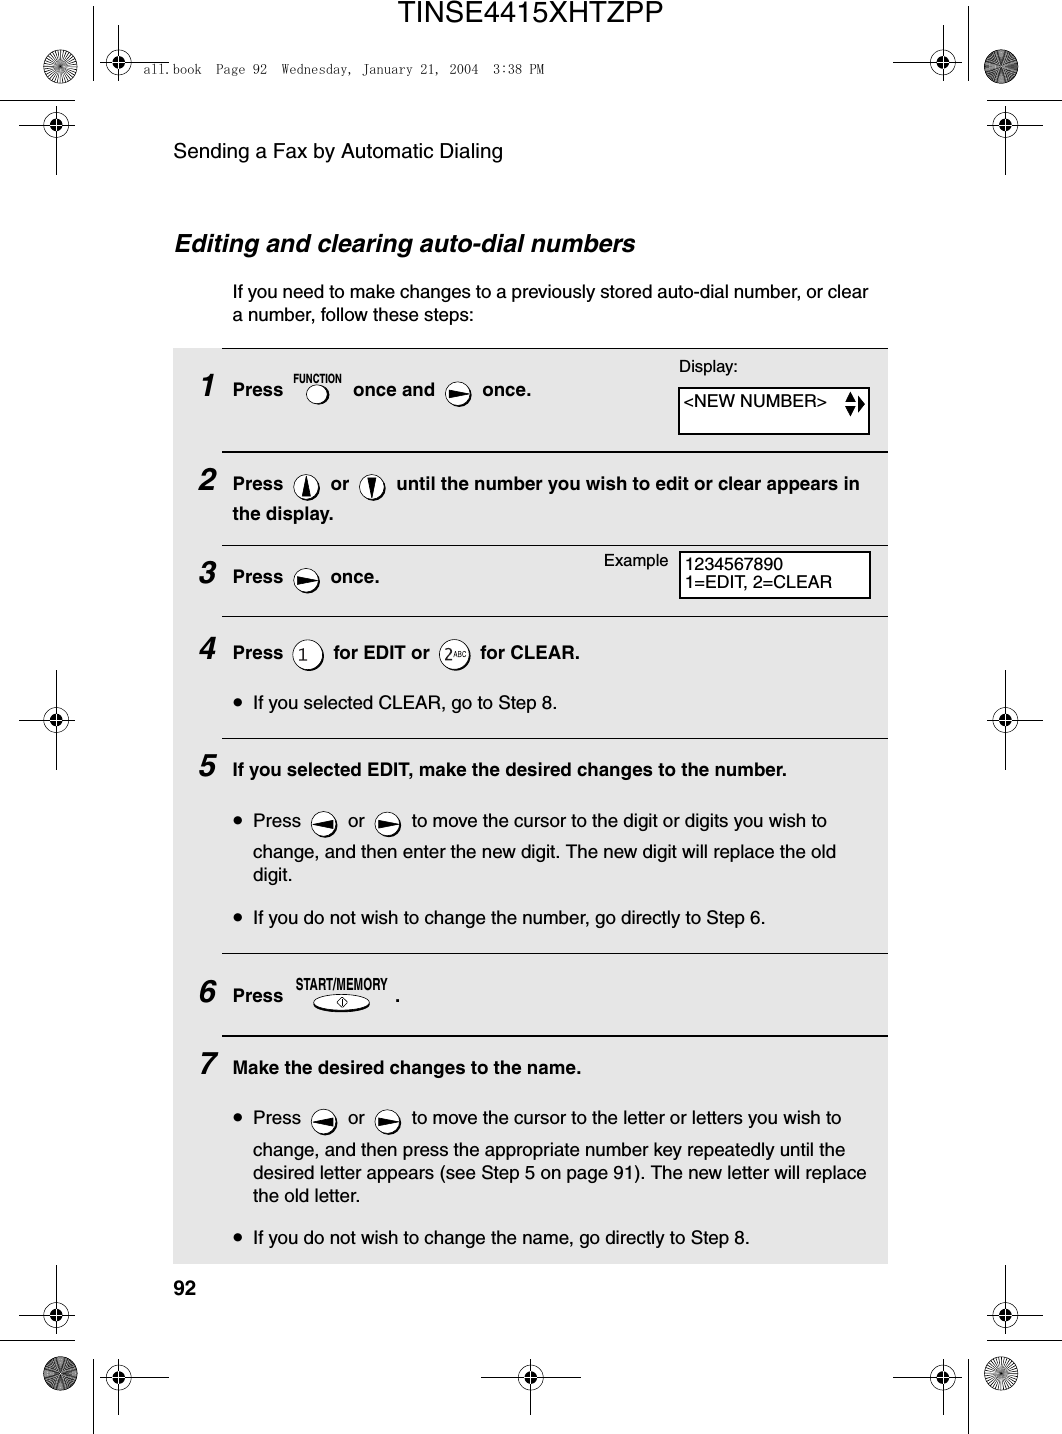 Sending a Fax by Automatic Dialing92Editing and clearing auto-dial numbersIf you need to make changes to a previously stored auto-dial number, or clear a number, follow these steps:1Press   once and   once.2Press   or   until the number you wish to edit or clear appears in the display.3Press  once.4Press   for EDIT or   for CLEAR.•If you selected CLEAR, go to Step 8.5If you selected EDIT, make the desired changes to the number. •Press   or   to move the cursor to the digit or digits you wish to change, and then enter the new digit. The new digit will replace the old digit.•If you do not wish to change the number, go directly to Step 6.6Press .7Make the desired changes to the name. •Press   or   to move the cursor to the letter or letters you wish to change, and then press the appropriate number key repeatedly until the desired letter appears (see Step 5 on page 91). The new letter will replace the old letter.•If you do not wish to change the name, go directly to Step 8.FUNCTIONSTART/MEMORYDisplay:&lt;NEW NUMBER&gt;12345678901=EDIT, 2=CLEARExampleall.book  Page 92  Wednesday, January 21, 2004  3:38 PMTINSE4415XHTZPP